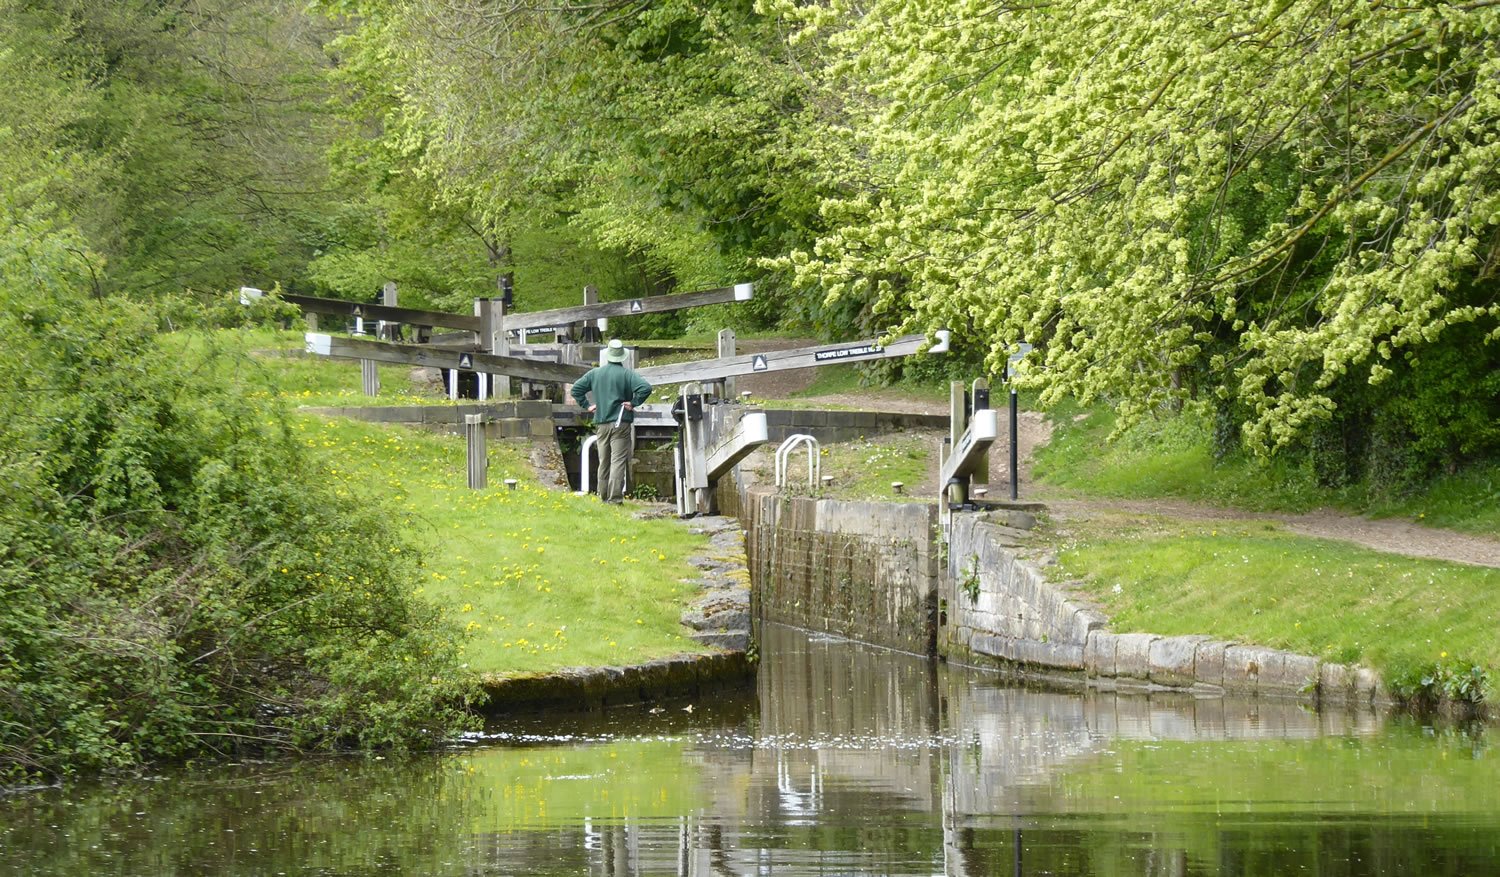 Image name giants staircase locks chesterfield canal south yorkshire the 9 image from the post Walk: The Giant's Staircase in Yorkshire.com.